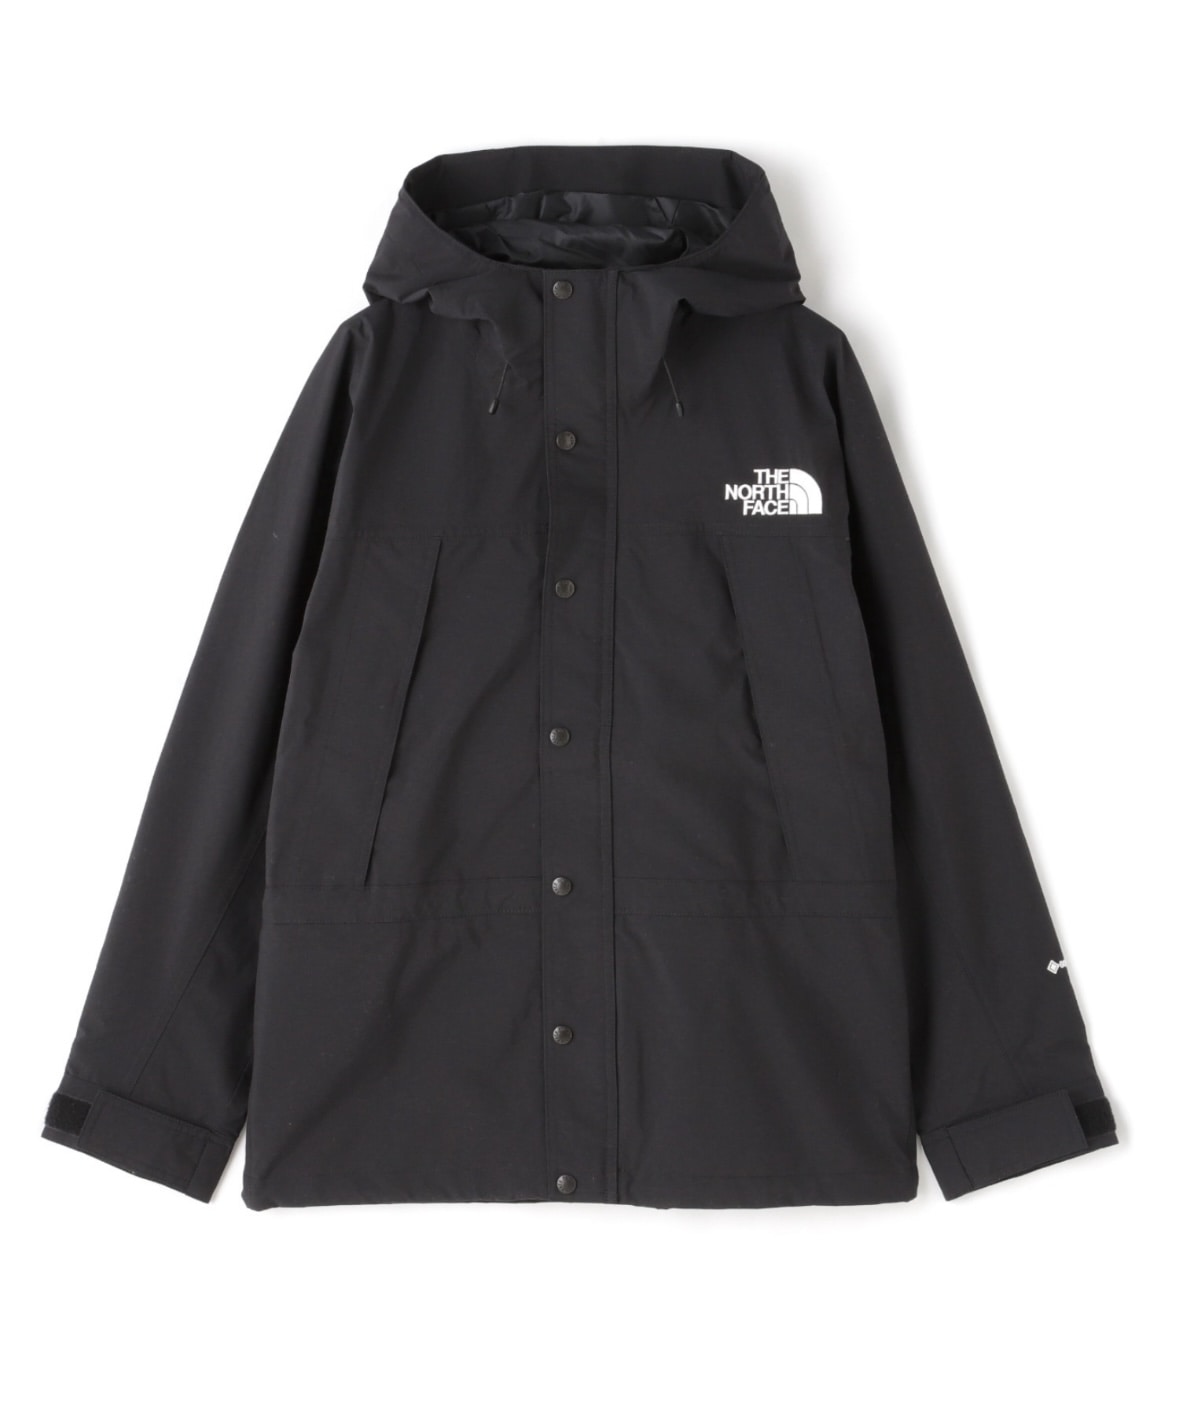 THE NORTH FACE MOUNTAIN LIGHT JACKET 黒BKブラック黒 - ナイロン ...